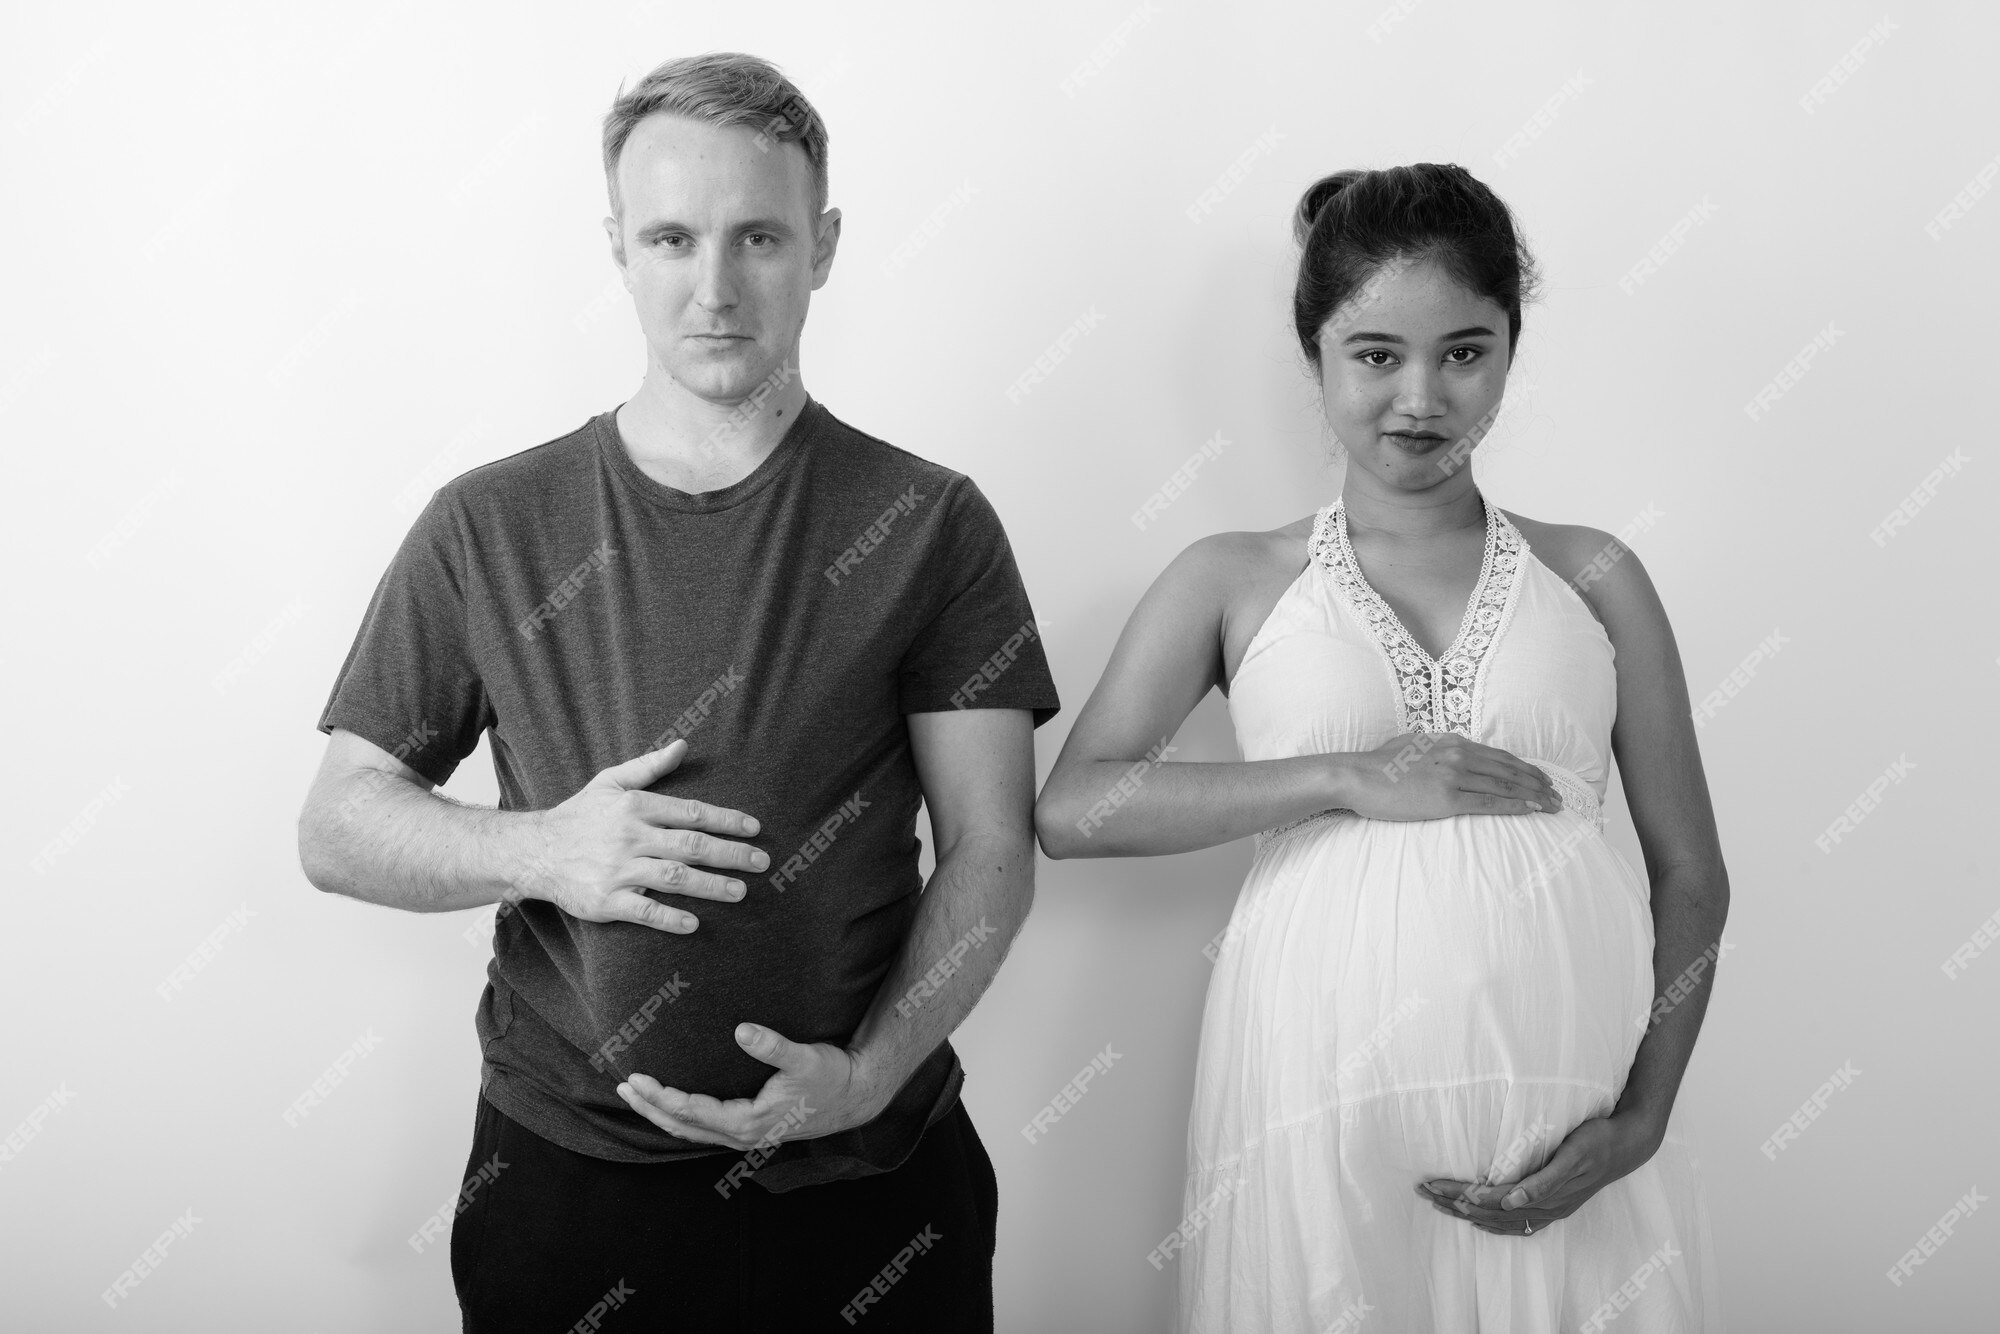 man-with-watermelon-as-stomach-pregnant-asian-woman-together-as-multi-ethnic-married-couple-black-white_251136-79737.jpg